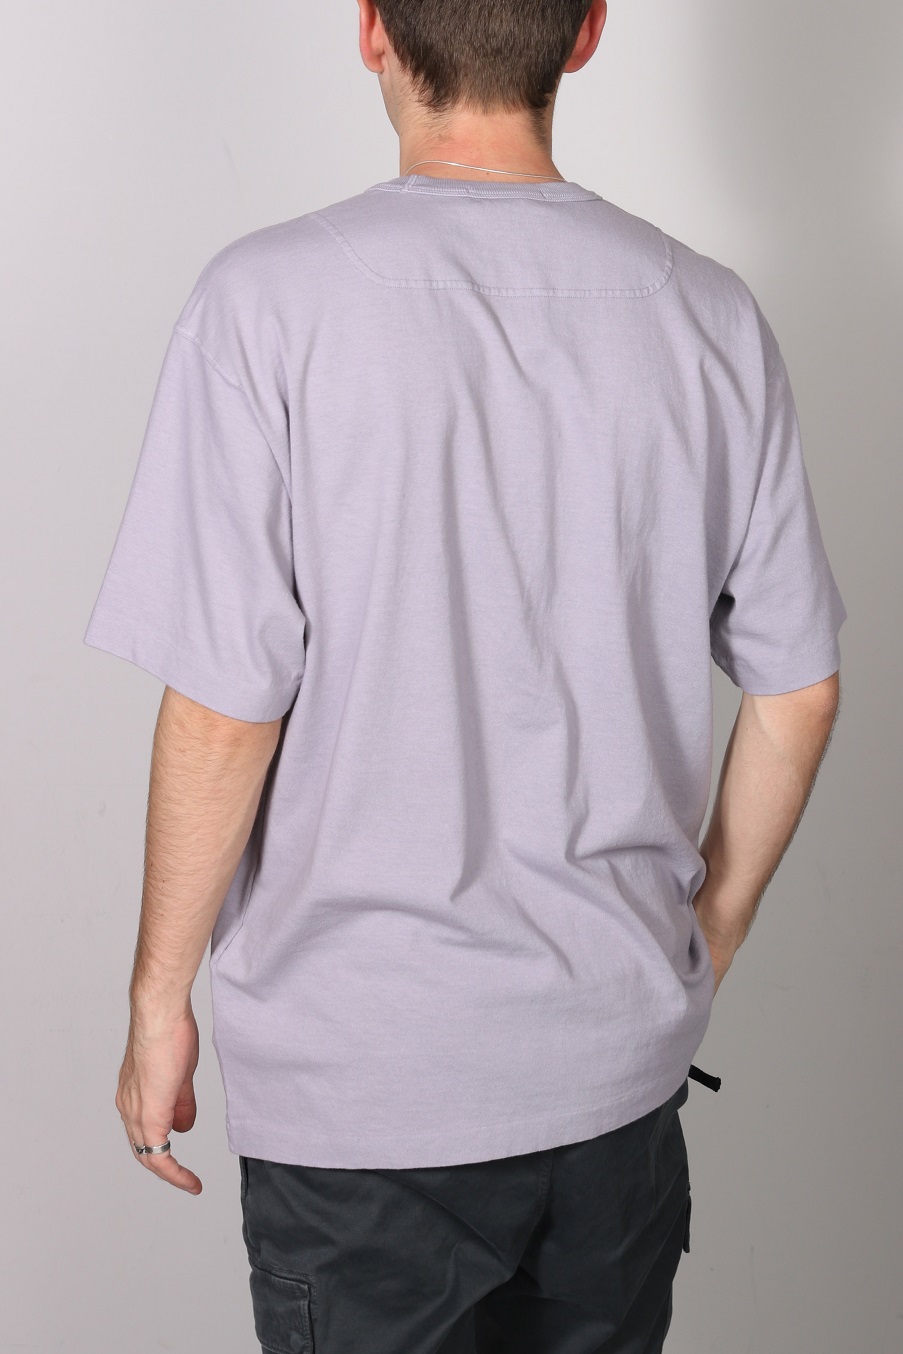 STONE ISLAND Oversized Stamp T-Shirt in Lavender